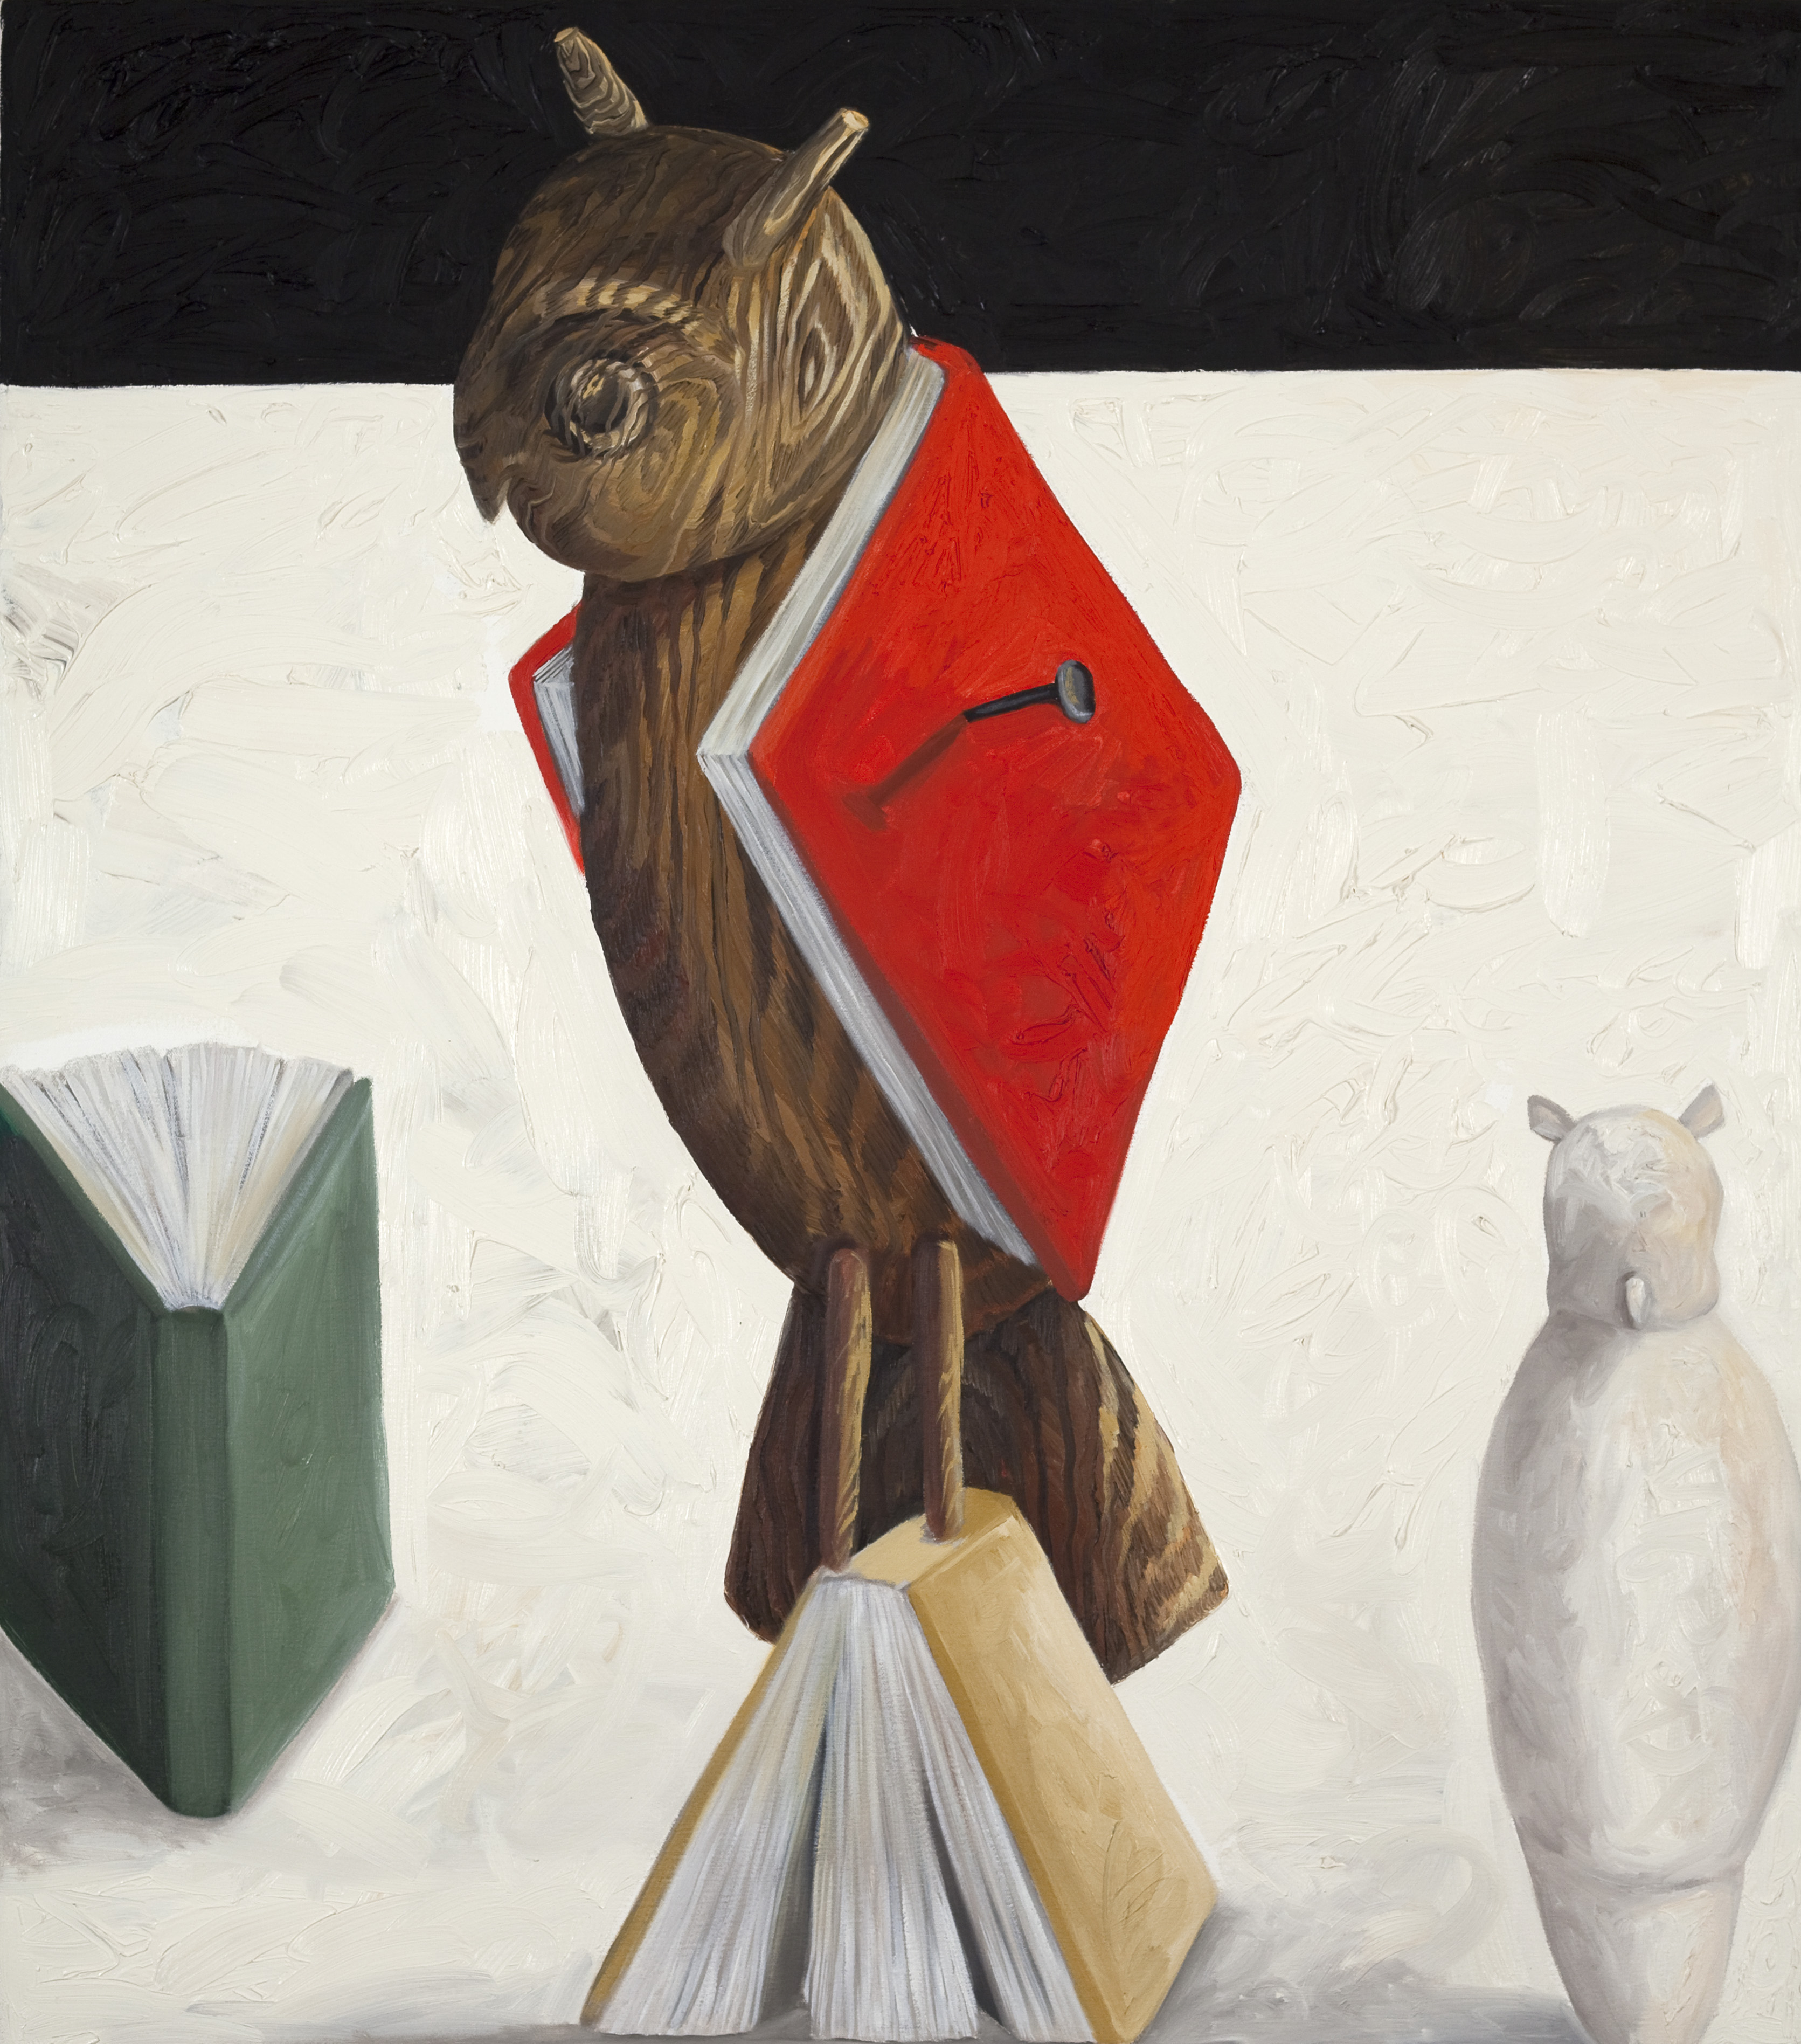 Cheryl Laemmle (b. 1947), "Wooden Owl," 1991, oil on canvas, 40 x 35 x 1 3/4 in., The Vogel Collection, 2008.12.36.